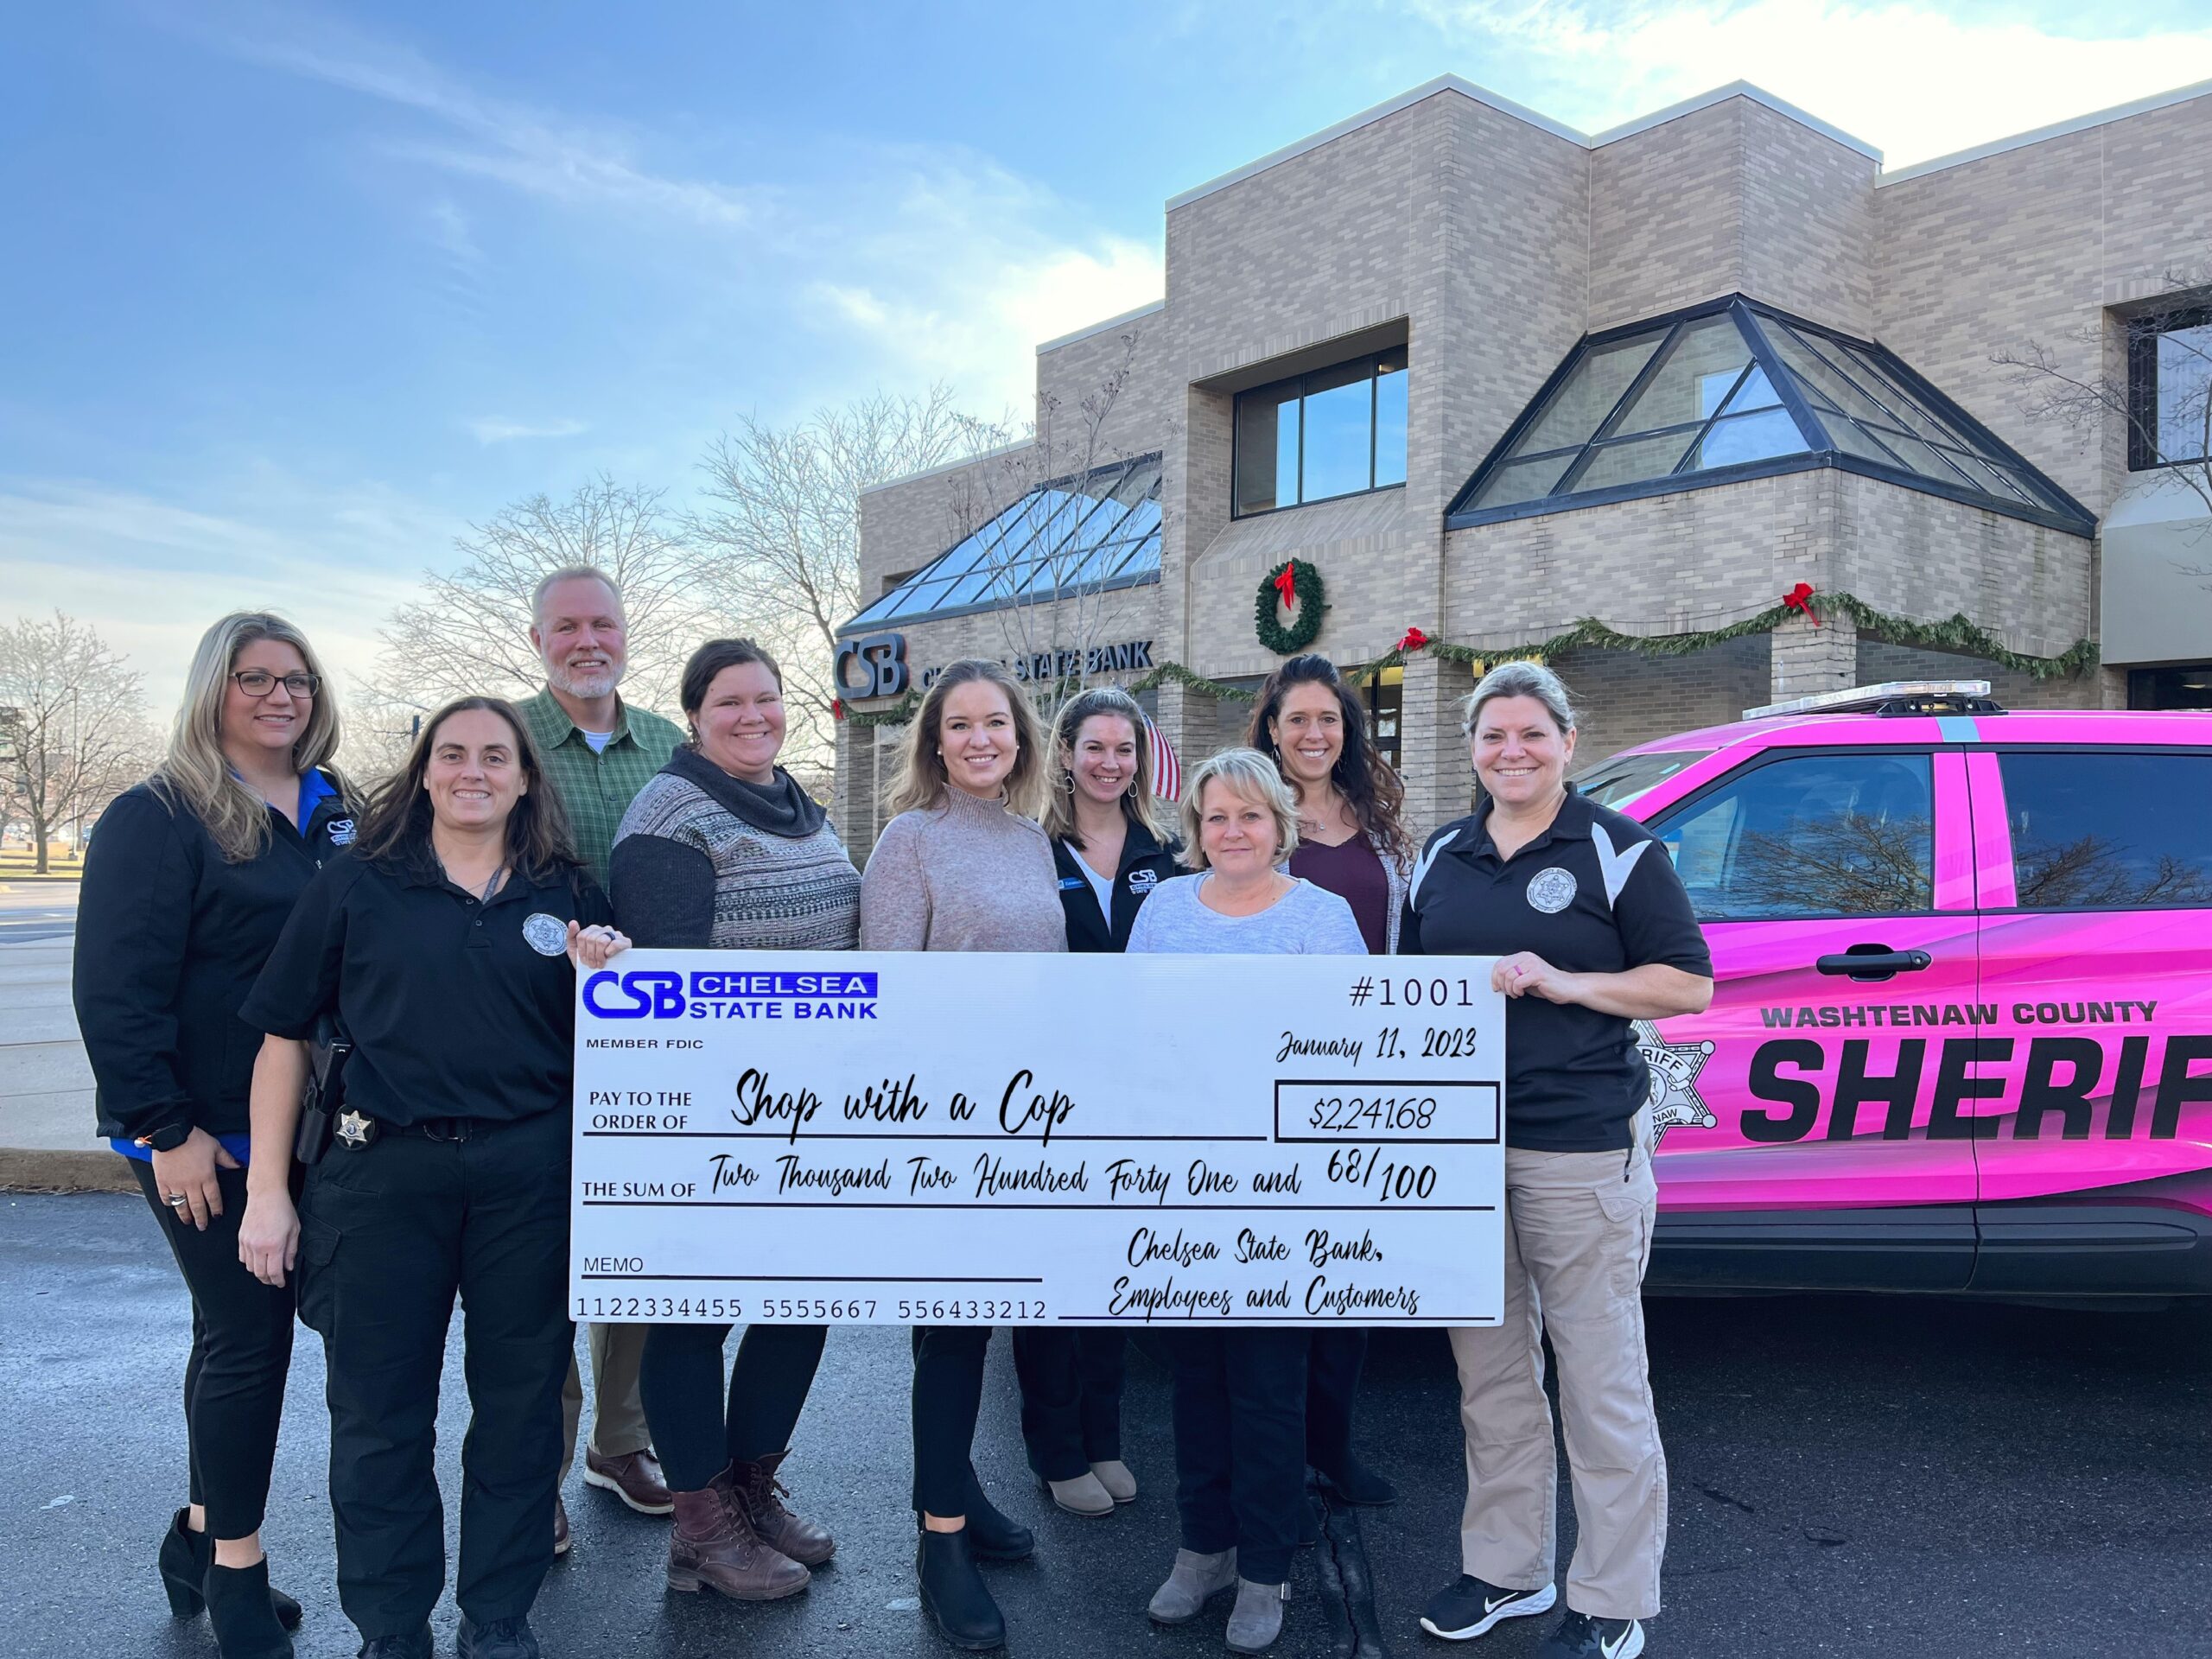 Chelsea State Bank presents donation to Washtenaw County Sheriff’s Department